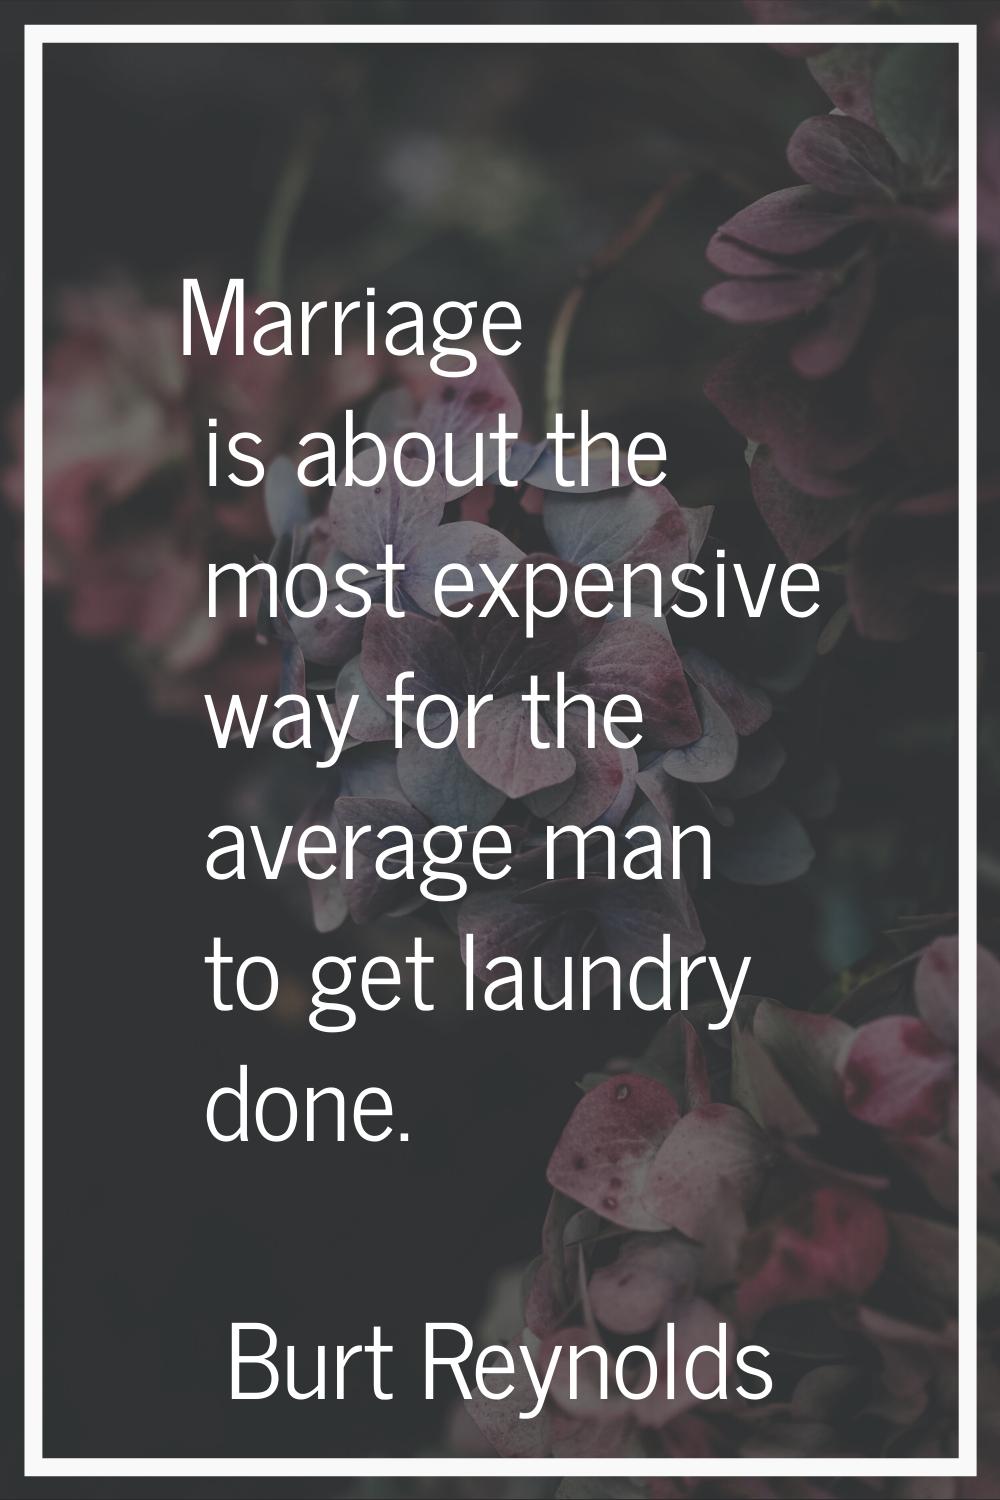 Marriage is about the most expensive way for the average man to get laundry done.